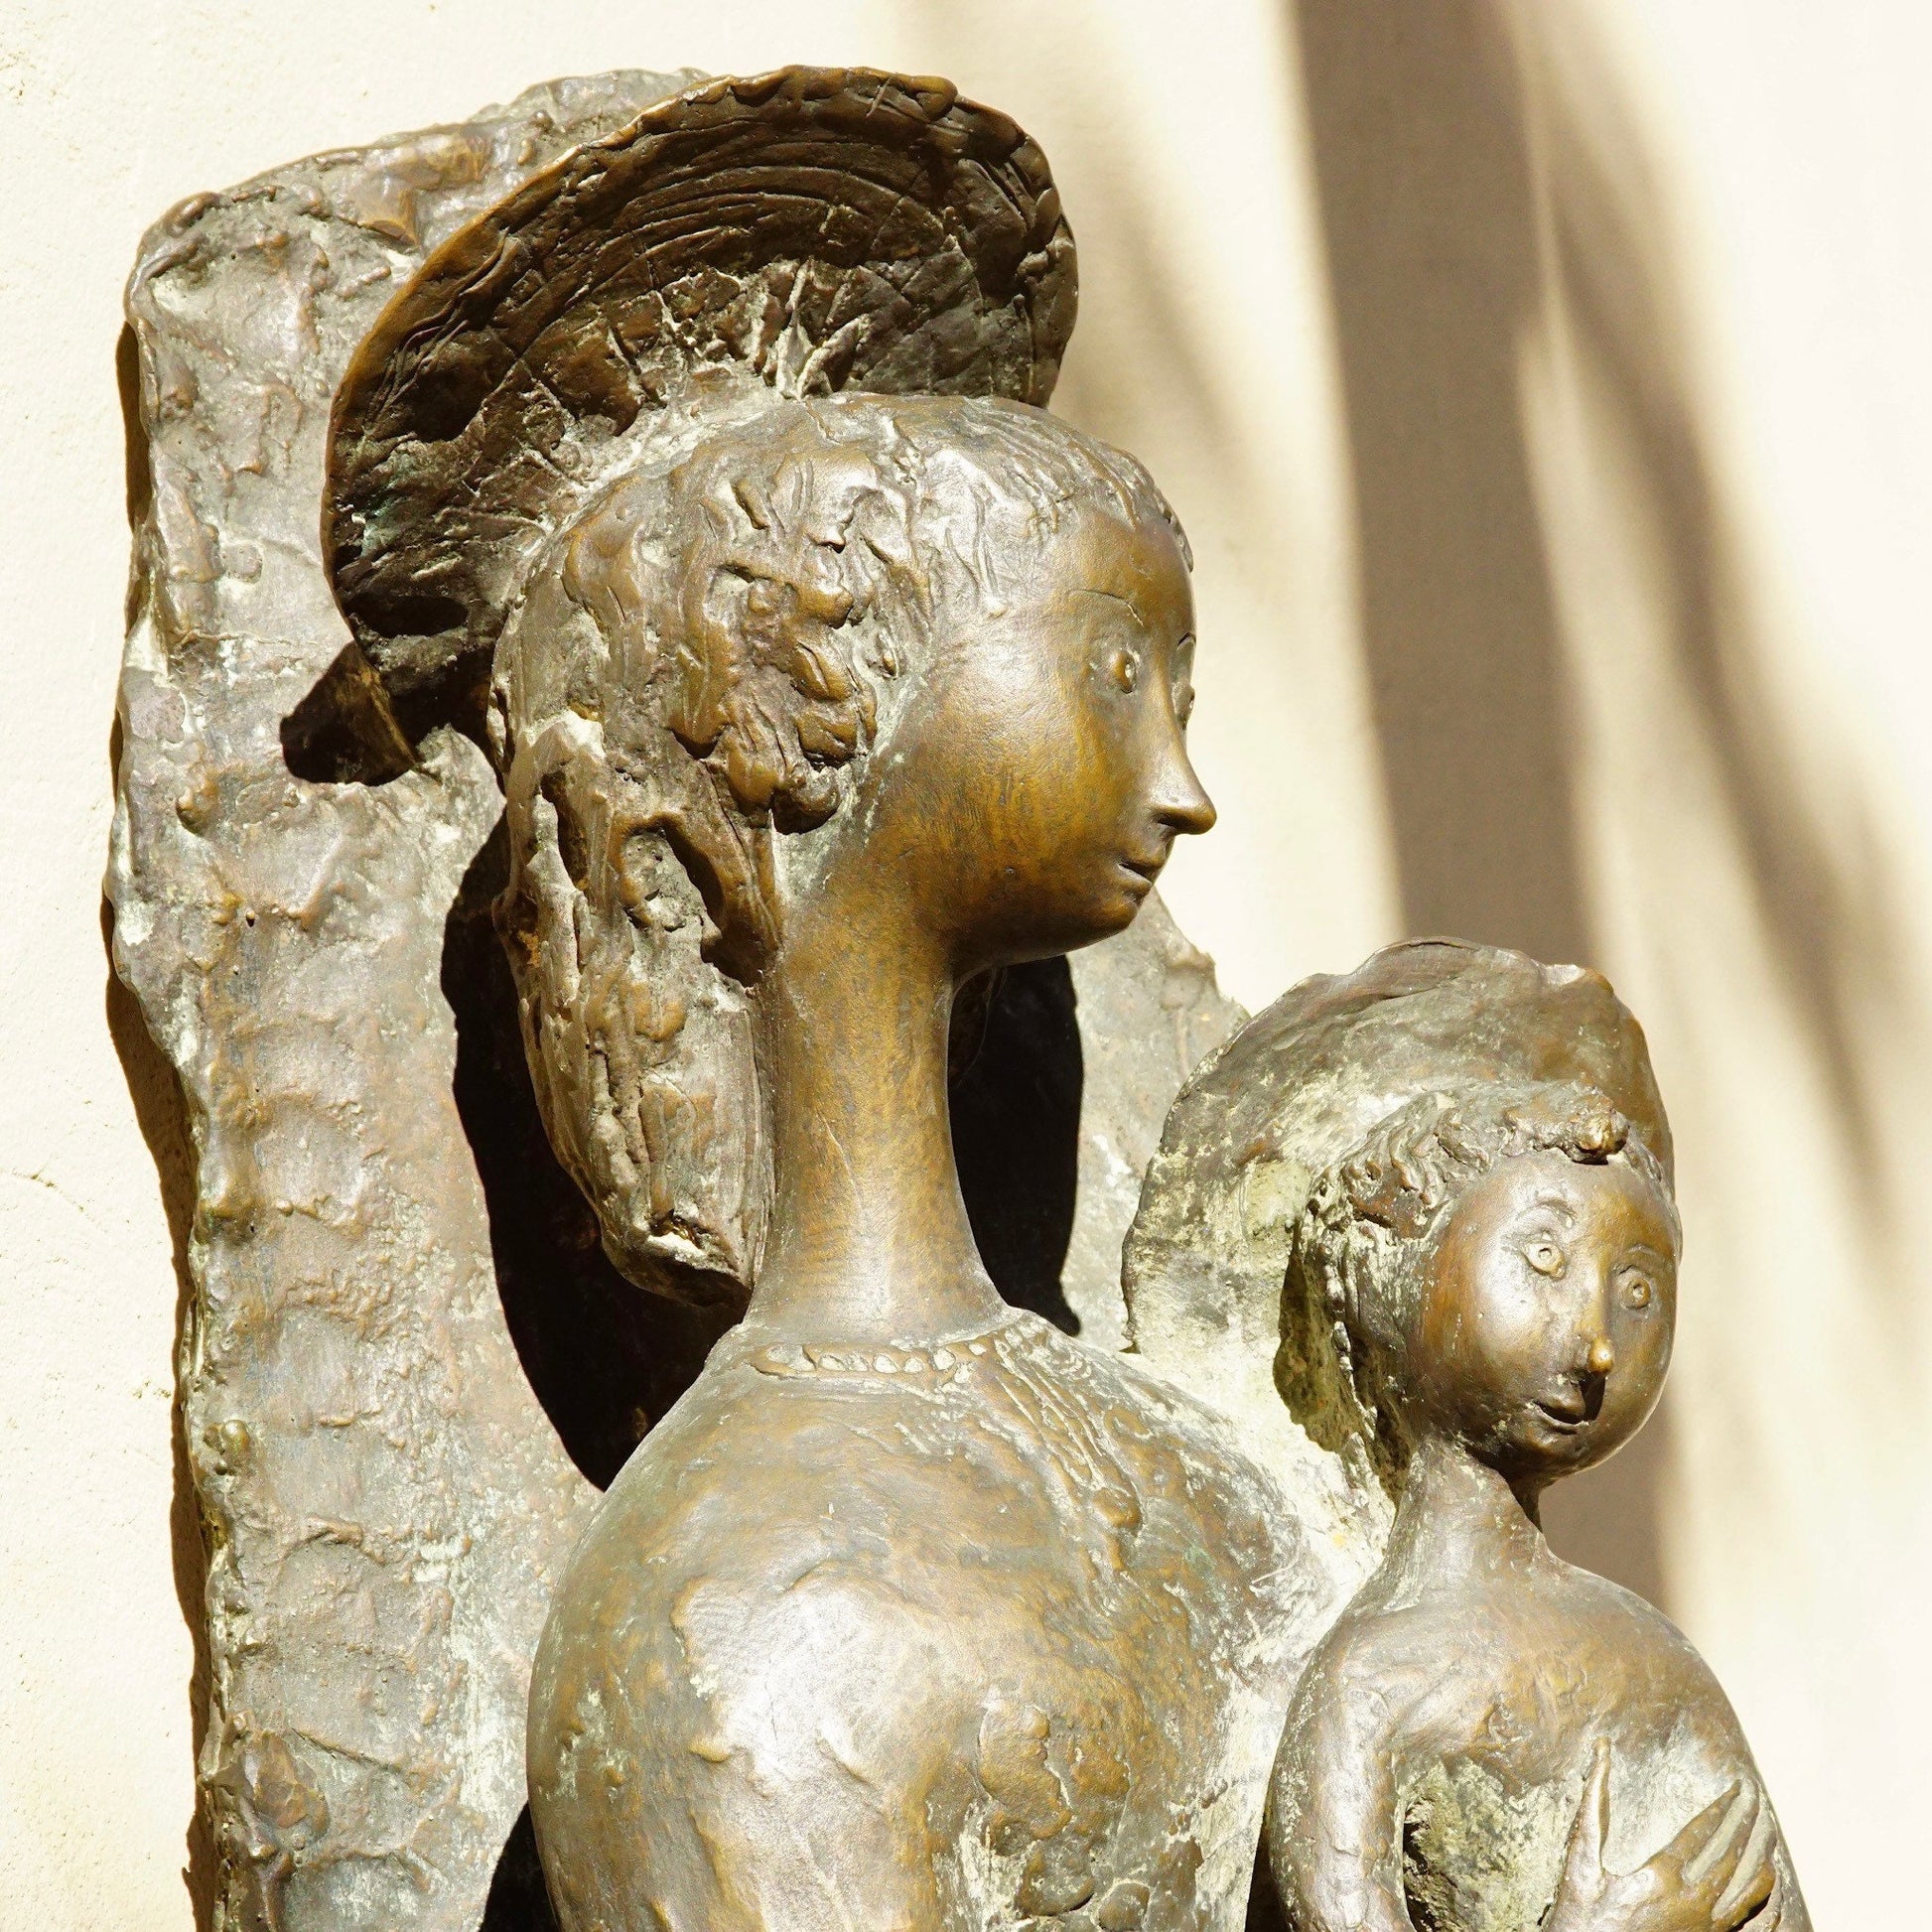 Vintage Toni Furlan signed bronze sculpture depicting an abstract modernist stylized Mother Mary and Baby Jesus, 36 inches tall, Italian religious statue from the mid-20th century.